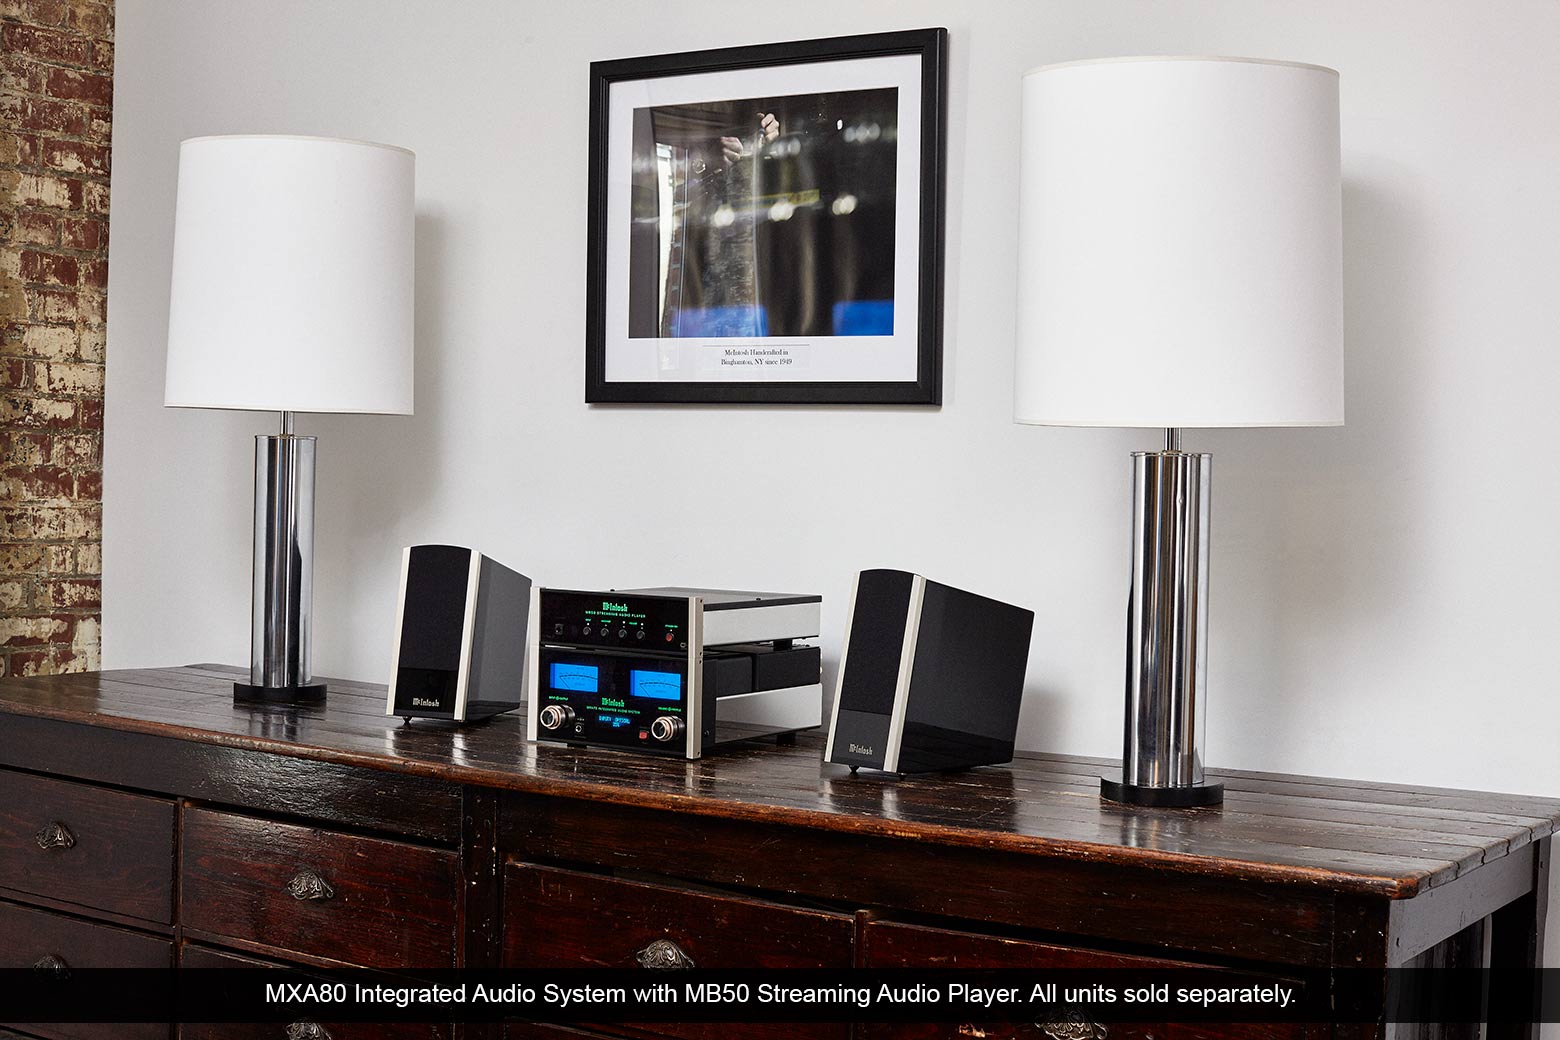 MXA80 Integrated Audio System and MB50 Streaming Audio Player.